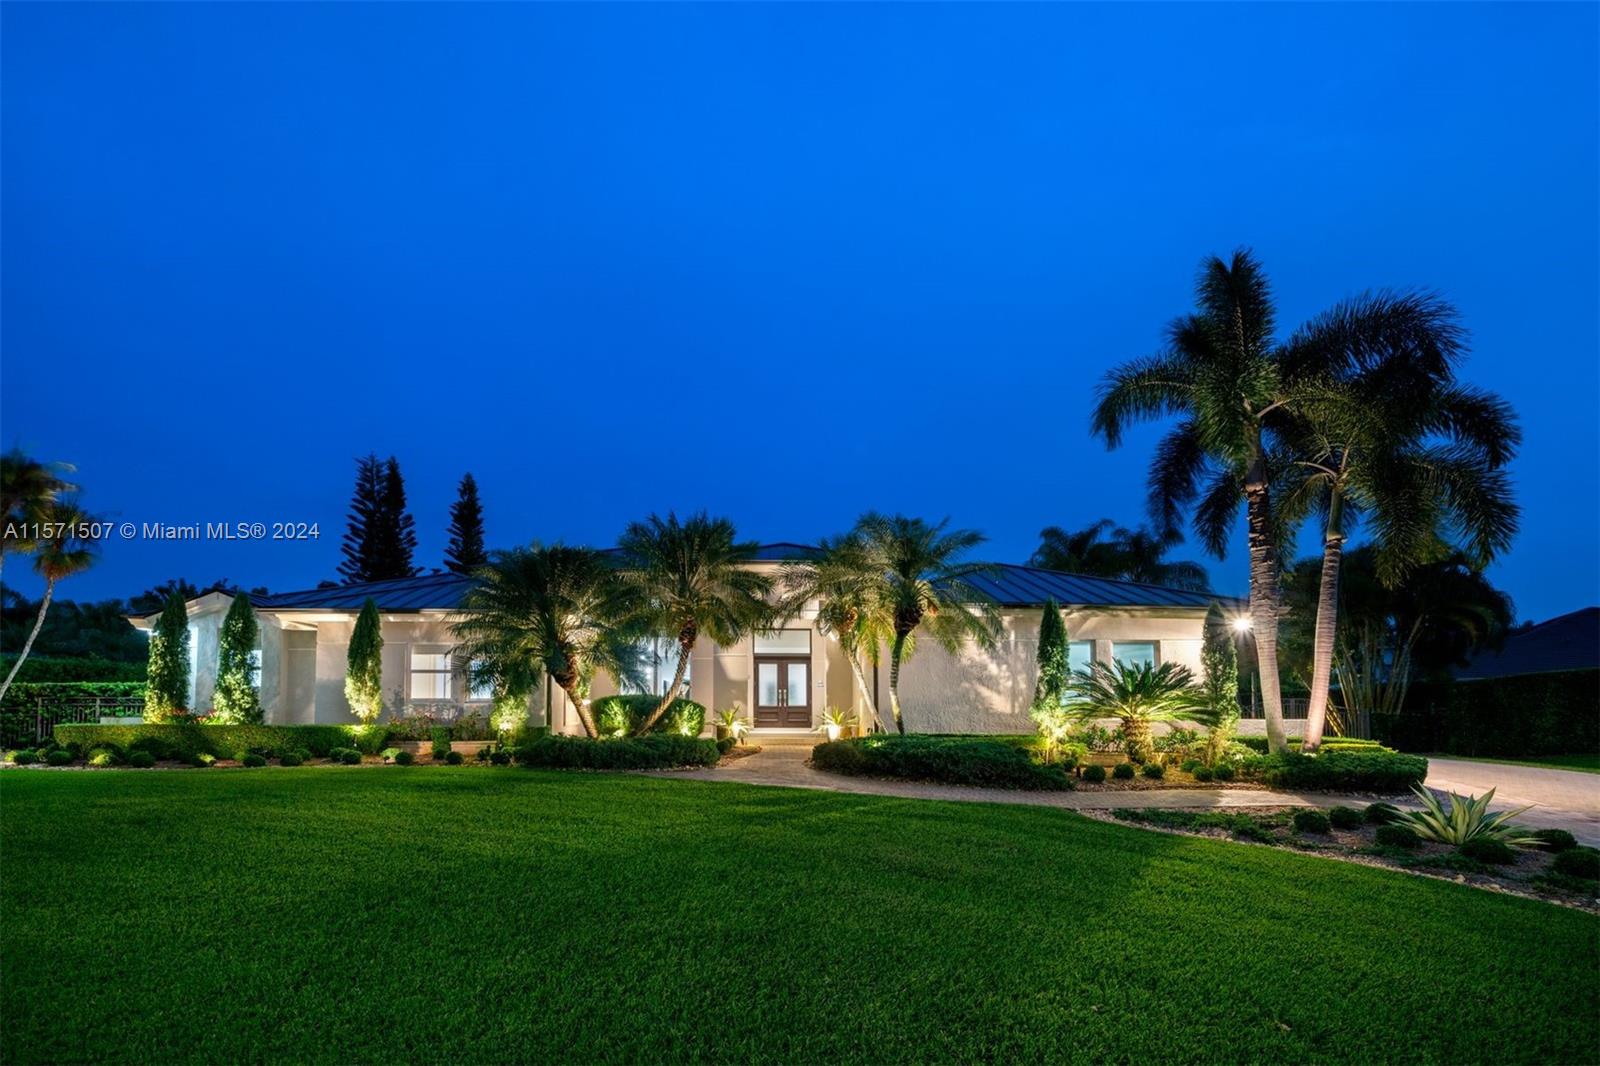 Nestled in the Palmetto Bay gated community of Flamingo Garden Estates, this 6-bedroom, 4-bath estate boasts 4,496 SF on a nearly half-acre lot. Imagine relaxing by the heated saltwater pool or jacuzzi or firing up the Kalamazoo grill and pizza oven in the gourmet outdoor kitchen surrounded by a beautifully landscaped backyard. The one-story layout features volume ceilings, grand double-height foyer, two living areas, formal dining, two offices, generous light-filled rooms throughout, and Sonos sound system. The chef's kitchen is equipped with top-of-the-line appliances and quartzite counters. Unwind in the principal suite with a sitting area, two large walk-in closets, and luxurious bathroom featuring a separate custom tub and shower. Designed to entertain, this can be your dream home.